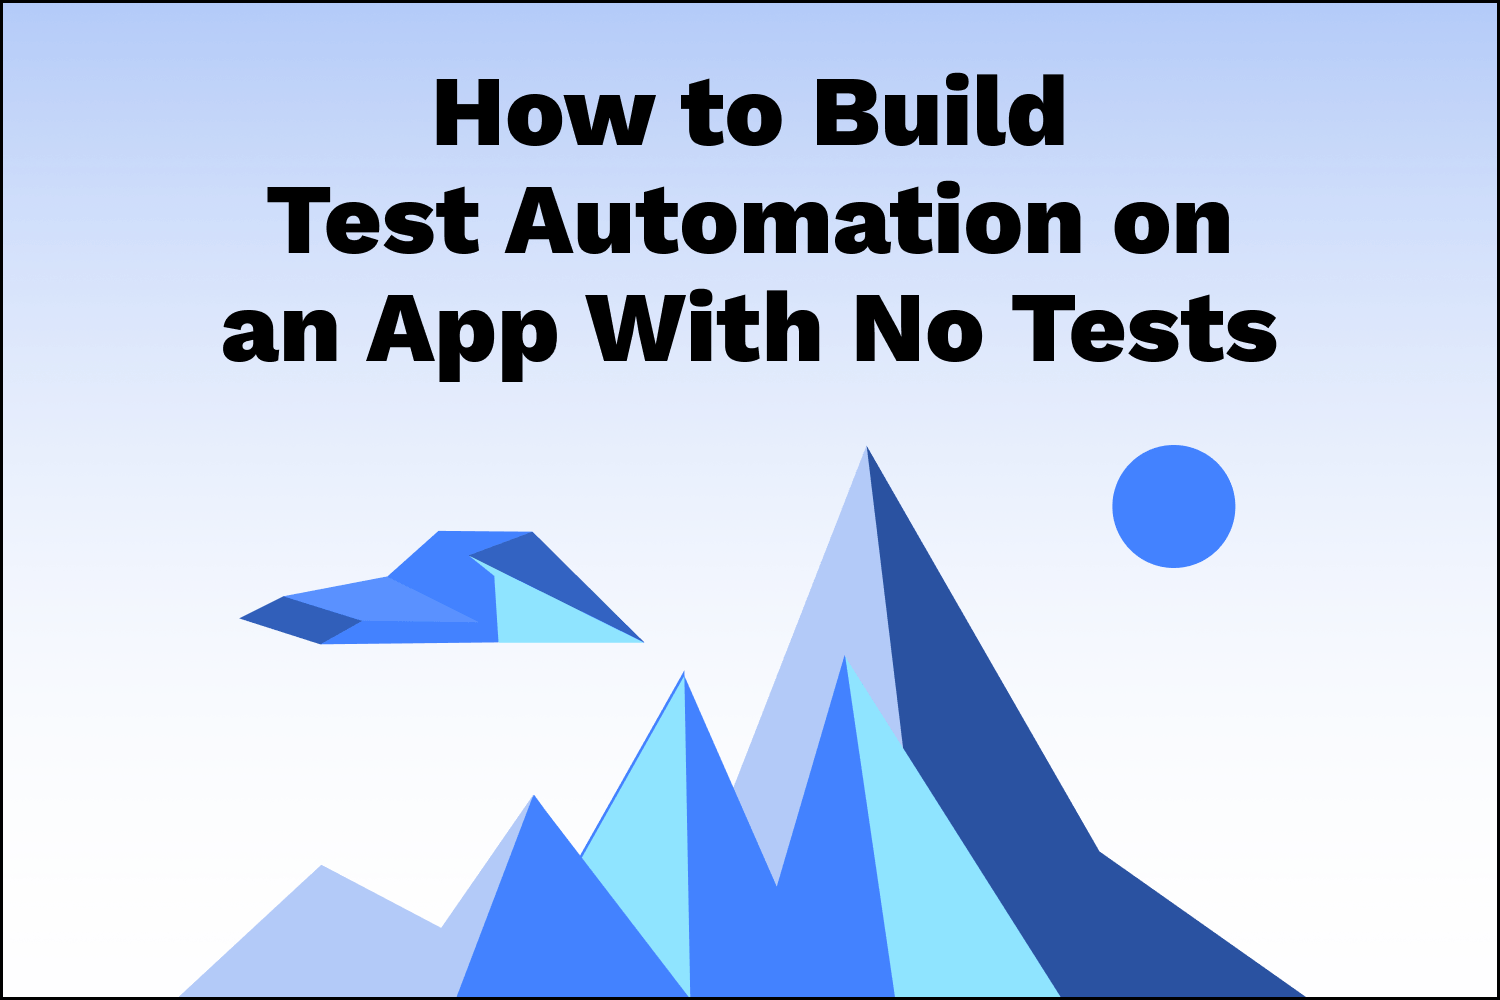 How to Build Test Automation on an App With No Tests